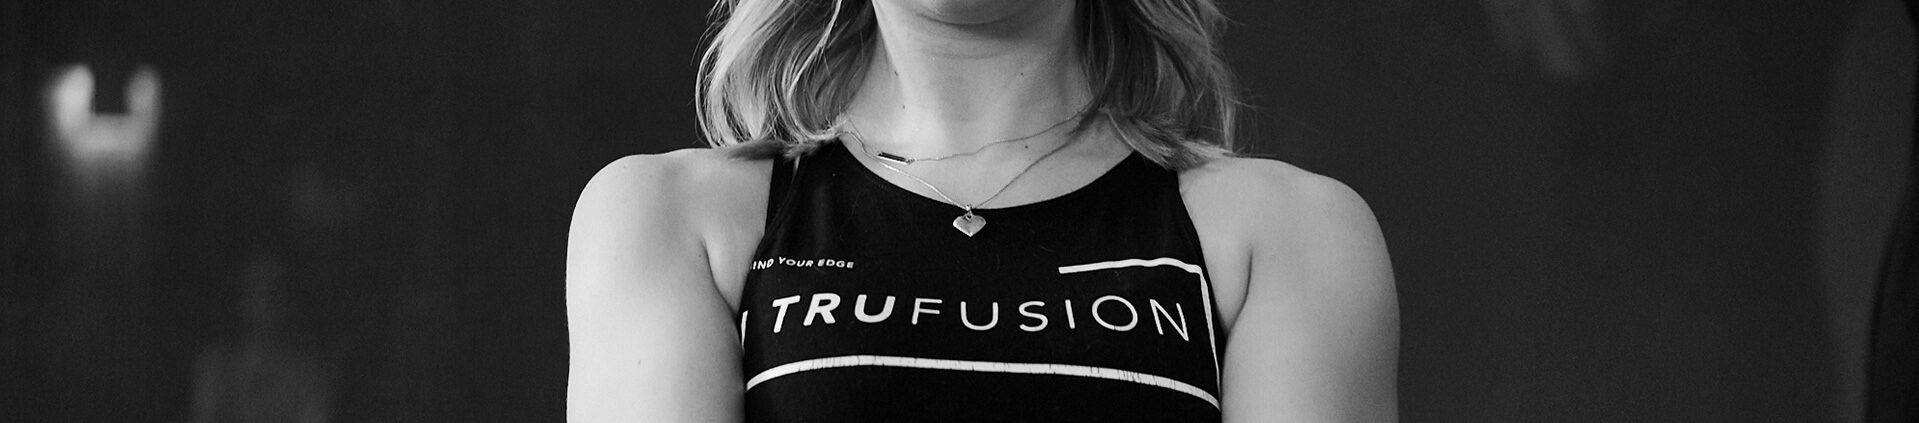 TruFusion branded workout clothing